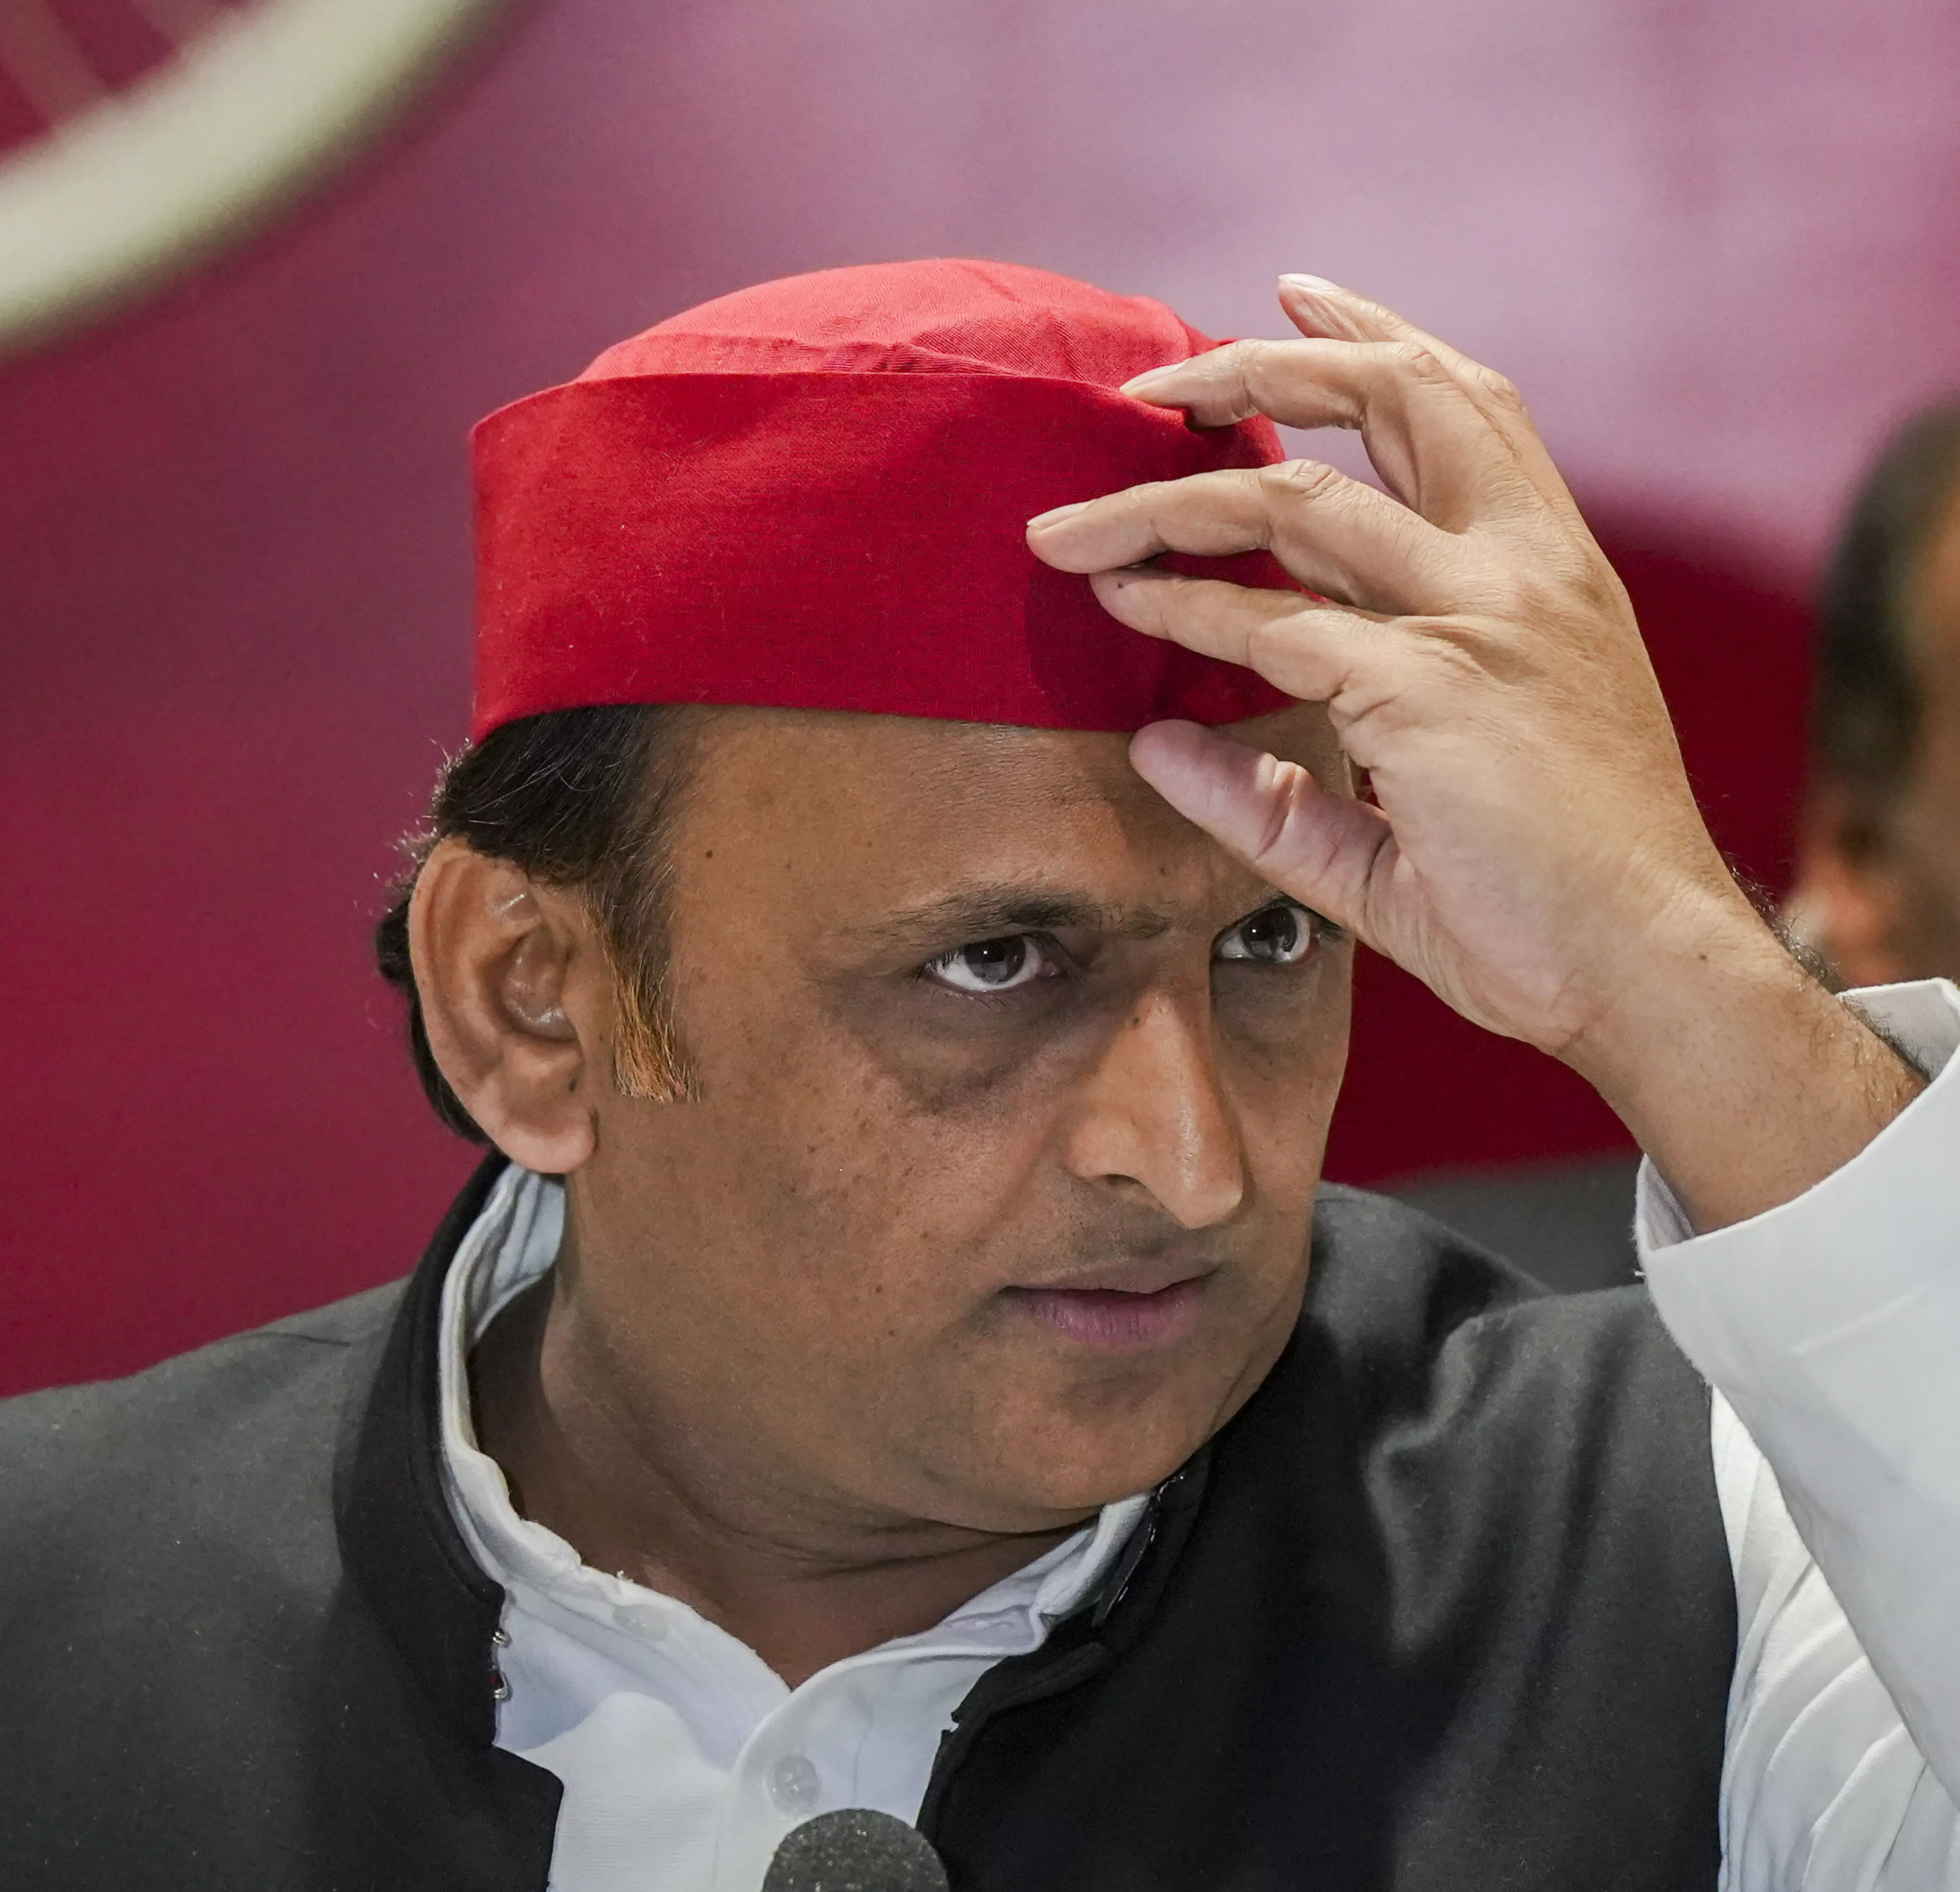 RS polls: Akhilesh Yadav expects to win 3 seats amid cross-voting speculation